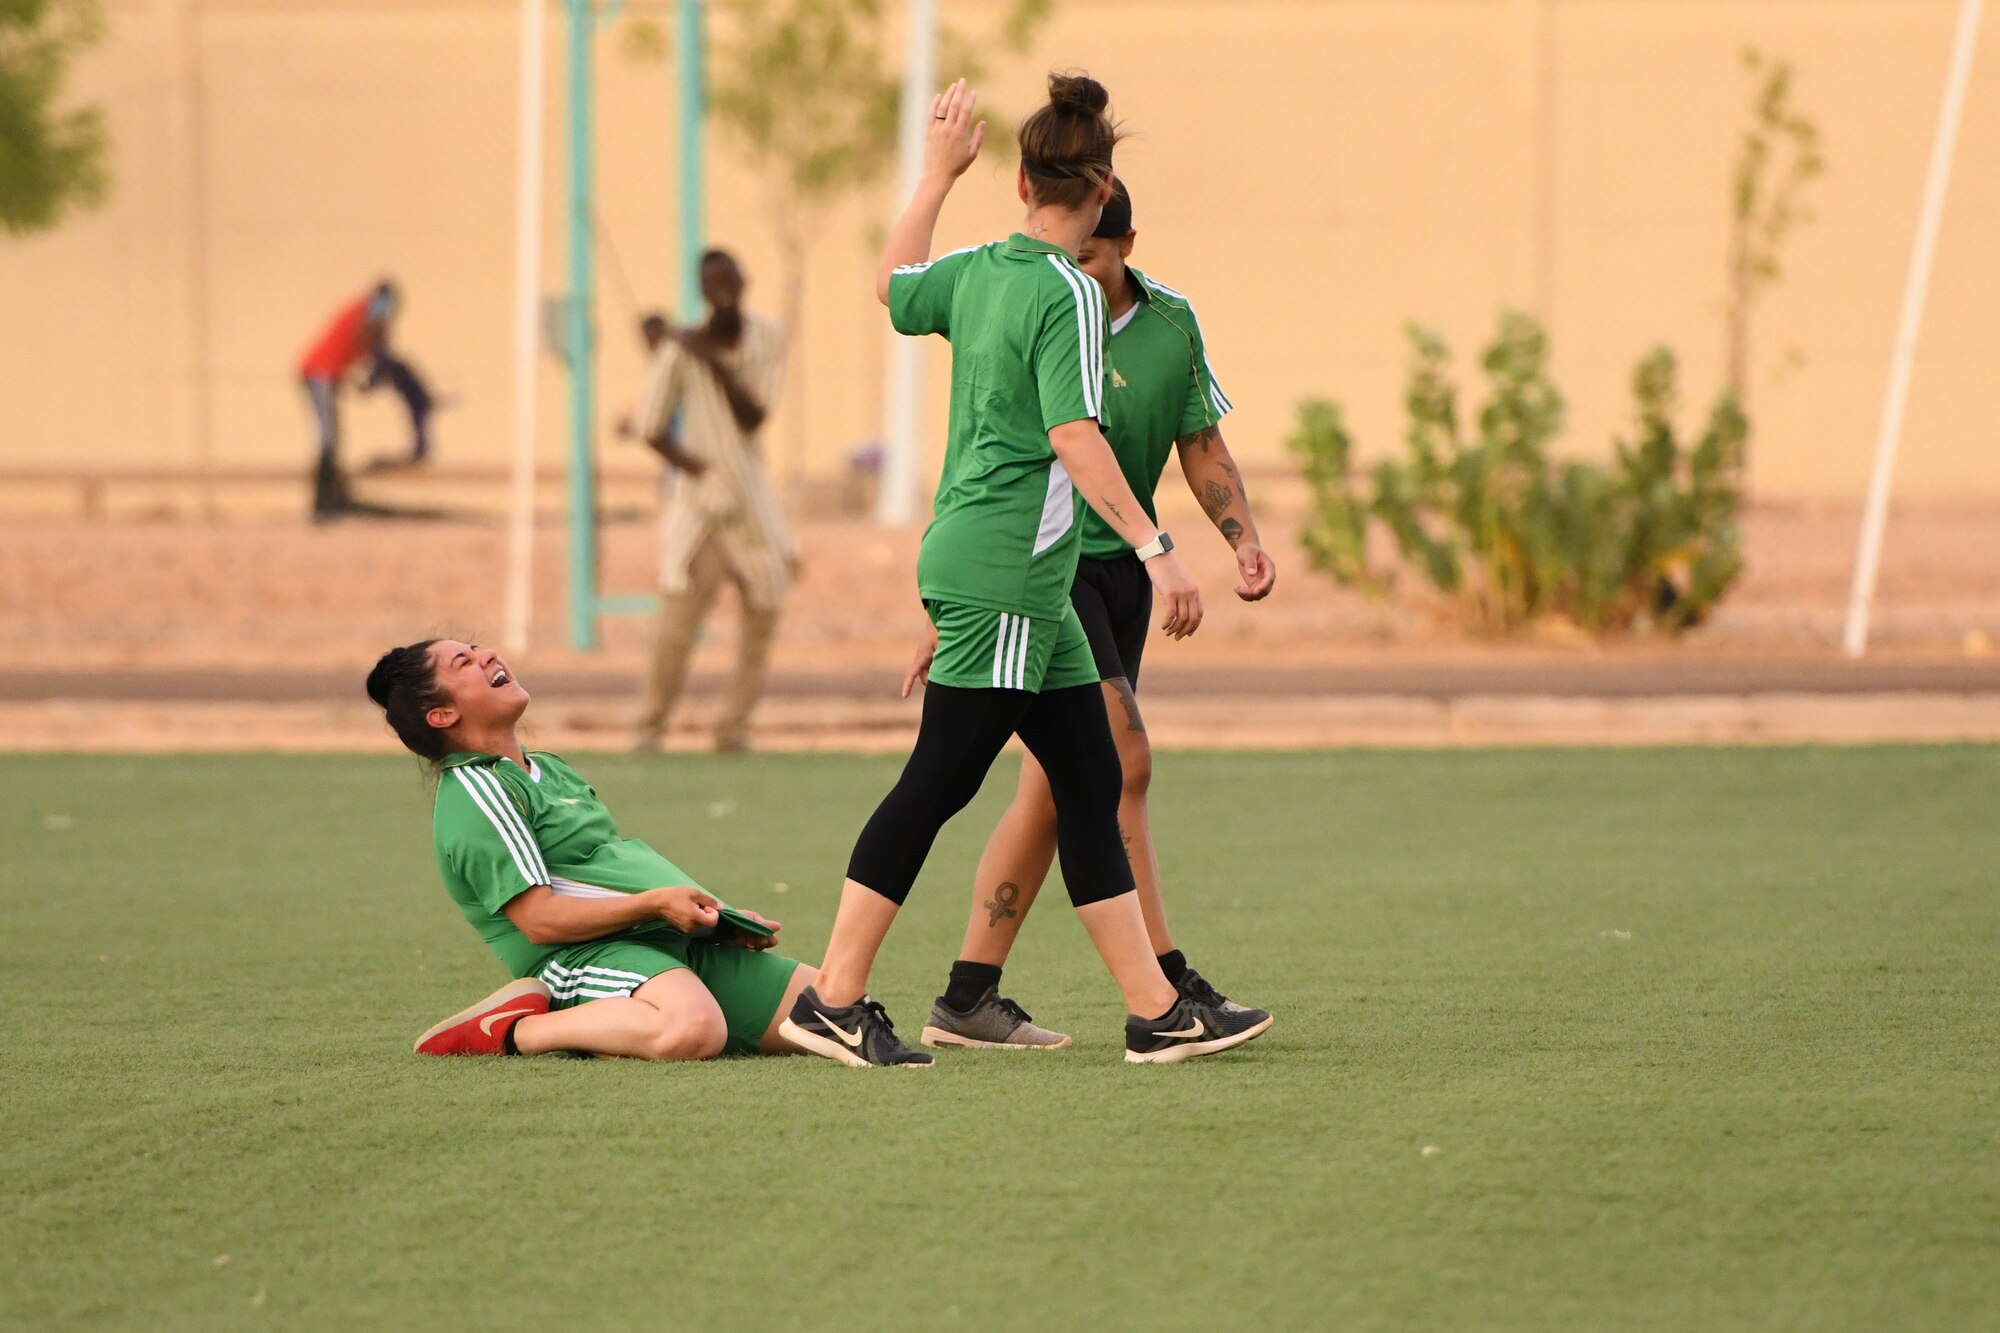 U.S. Air Force Airman First Class Alex Ferrero, 724th Expeditionary Air Base Squadron security forces member, celebrates after scoring a goal during a soccer game against the Nassara Athletic Club Women’s Soccer Team at the Agadez Sports Stadium in Agadez, Niger, July 5, 2019. The civil affairs team held the game to build rapport and promote positive sentiment between the local community and Nigerien Air Base 201 personnel.  (U.S. Air Force photo by Senior Airman Lexie West)